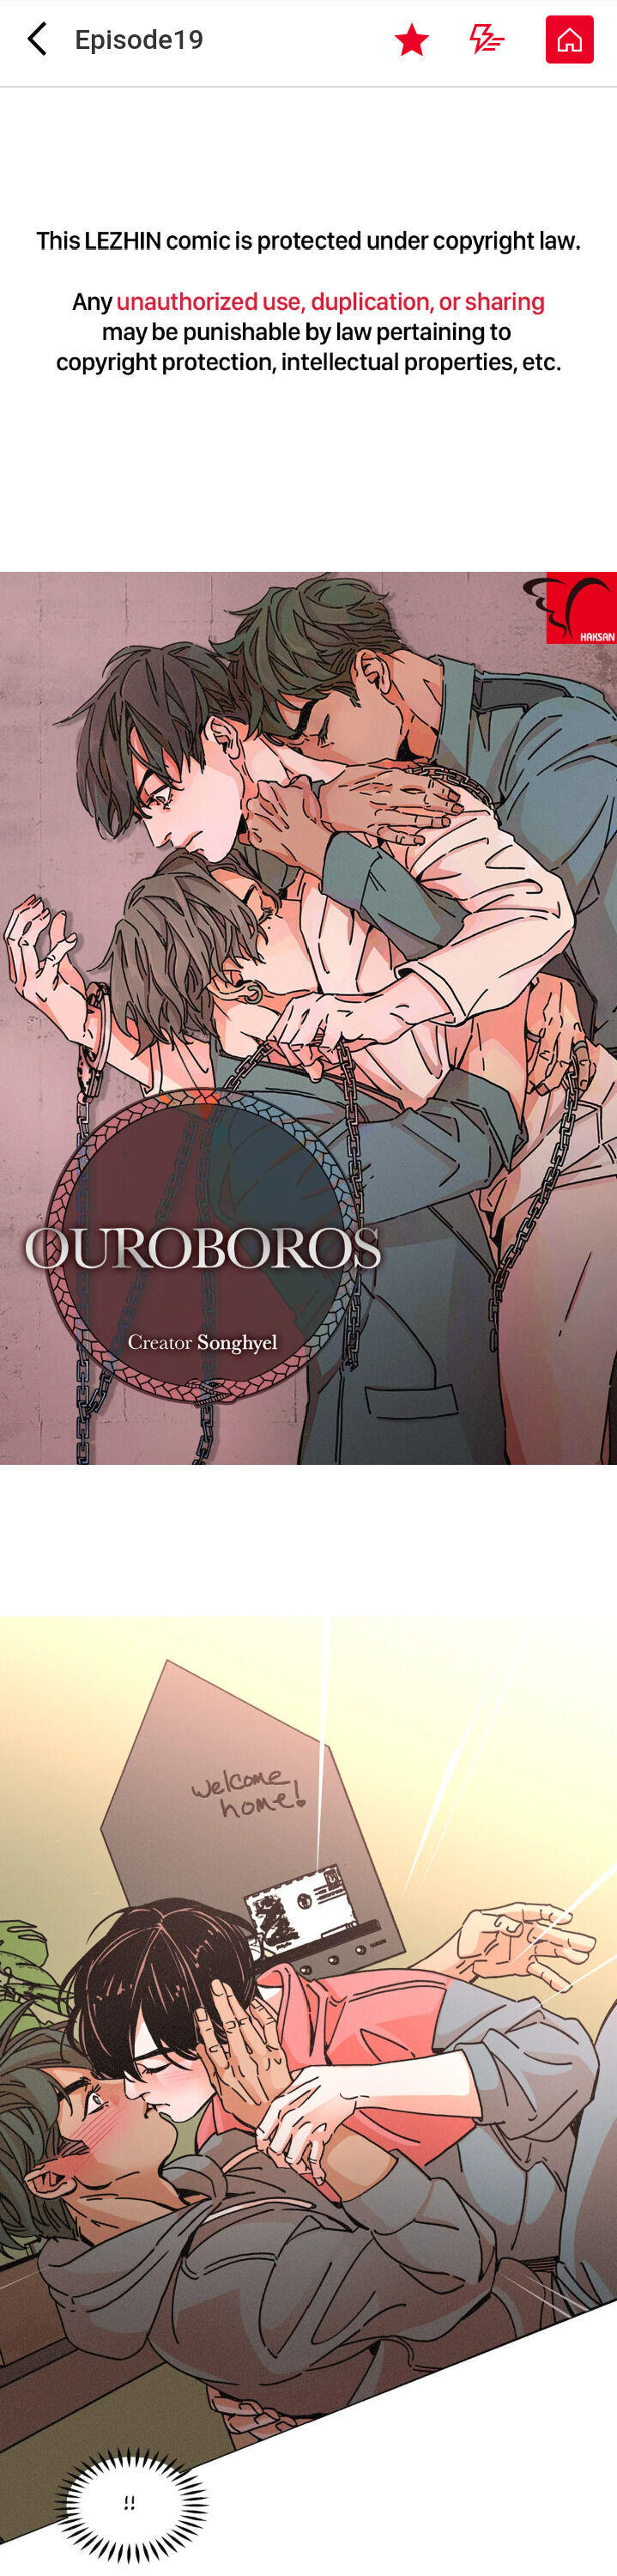 Ouroboros ウロボロス Chapter 19 Read Ouroboros ウロボロス Chapter 19 Online At Allmanga Us Page 1